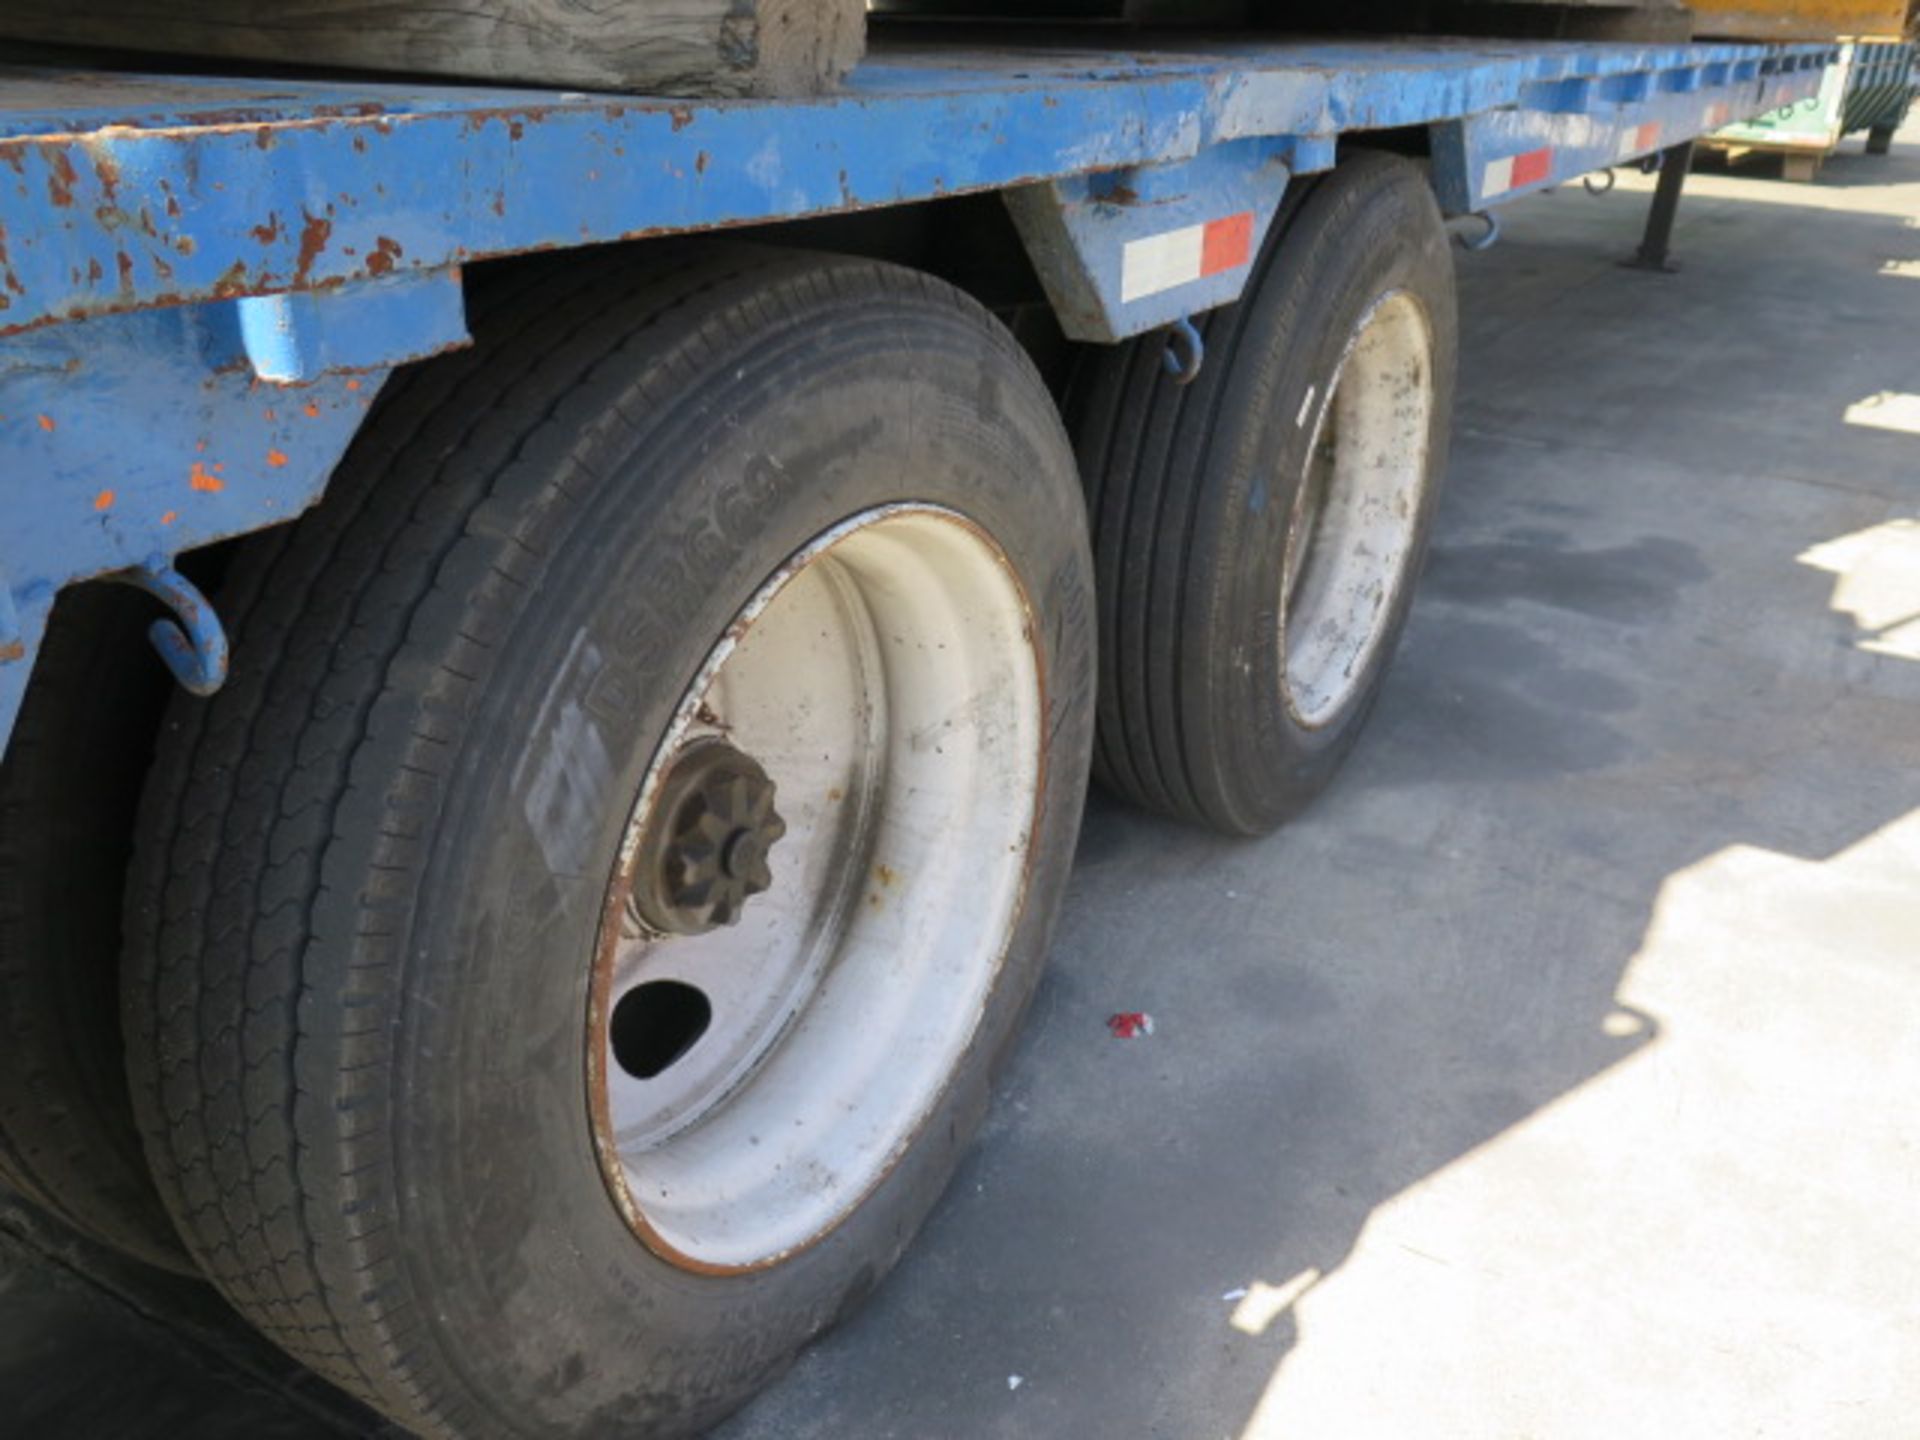 Drop-Deck Trailer Lisc 4KU8502 (SOLD AS-IS - NO WARRANTY) - Image 16 of 16